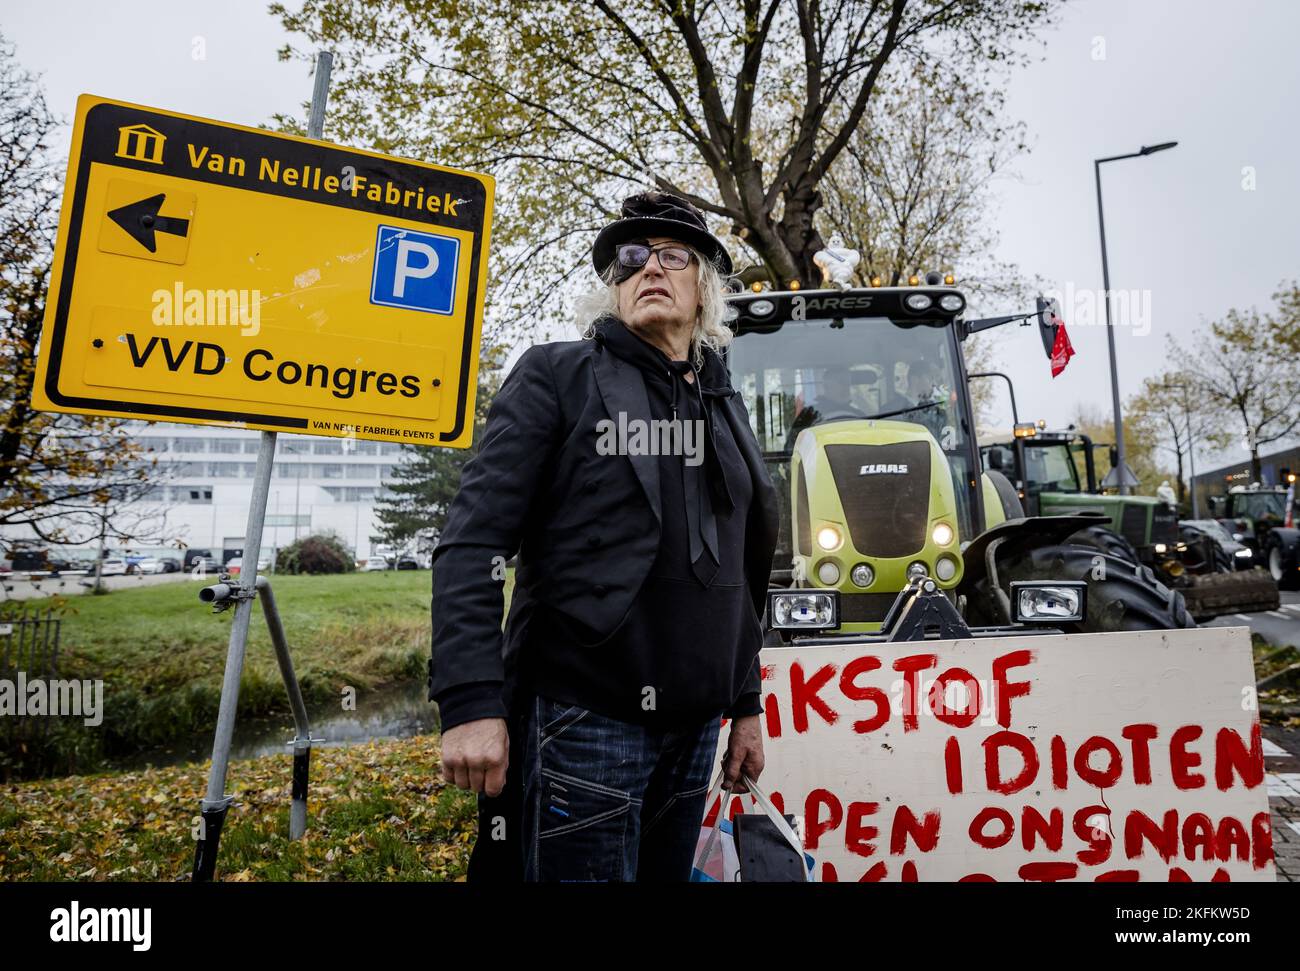 ROTTERDAM - Farmers demonstrate at the entrance of the Van Nelle Factory prior to the autumn congress of the VVD. ANP REMKO DE WAAL netherlands out - belgium out Stock Photo